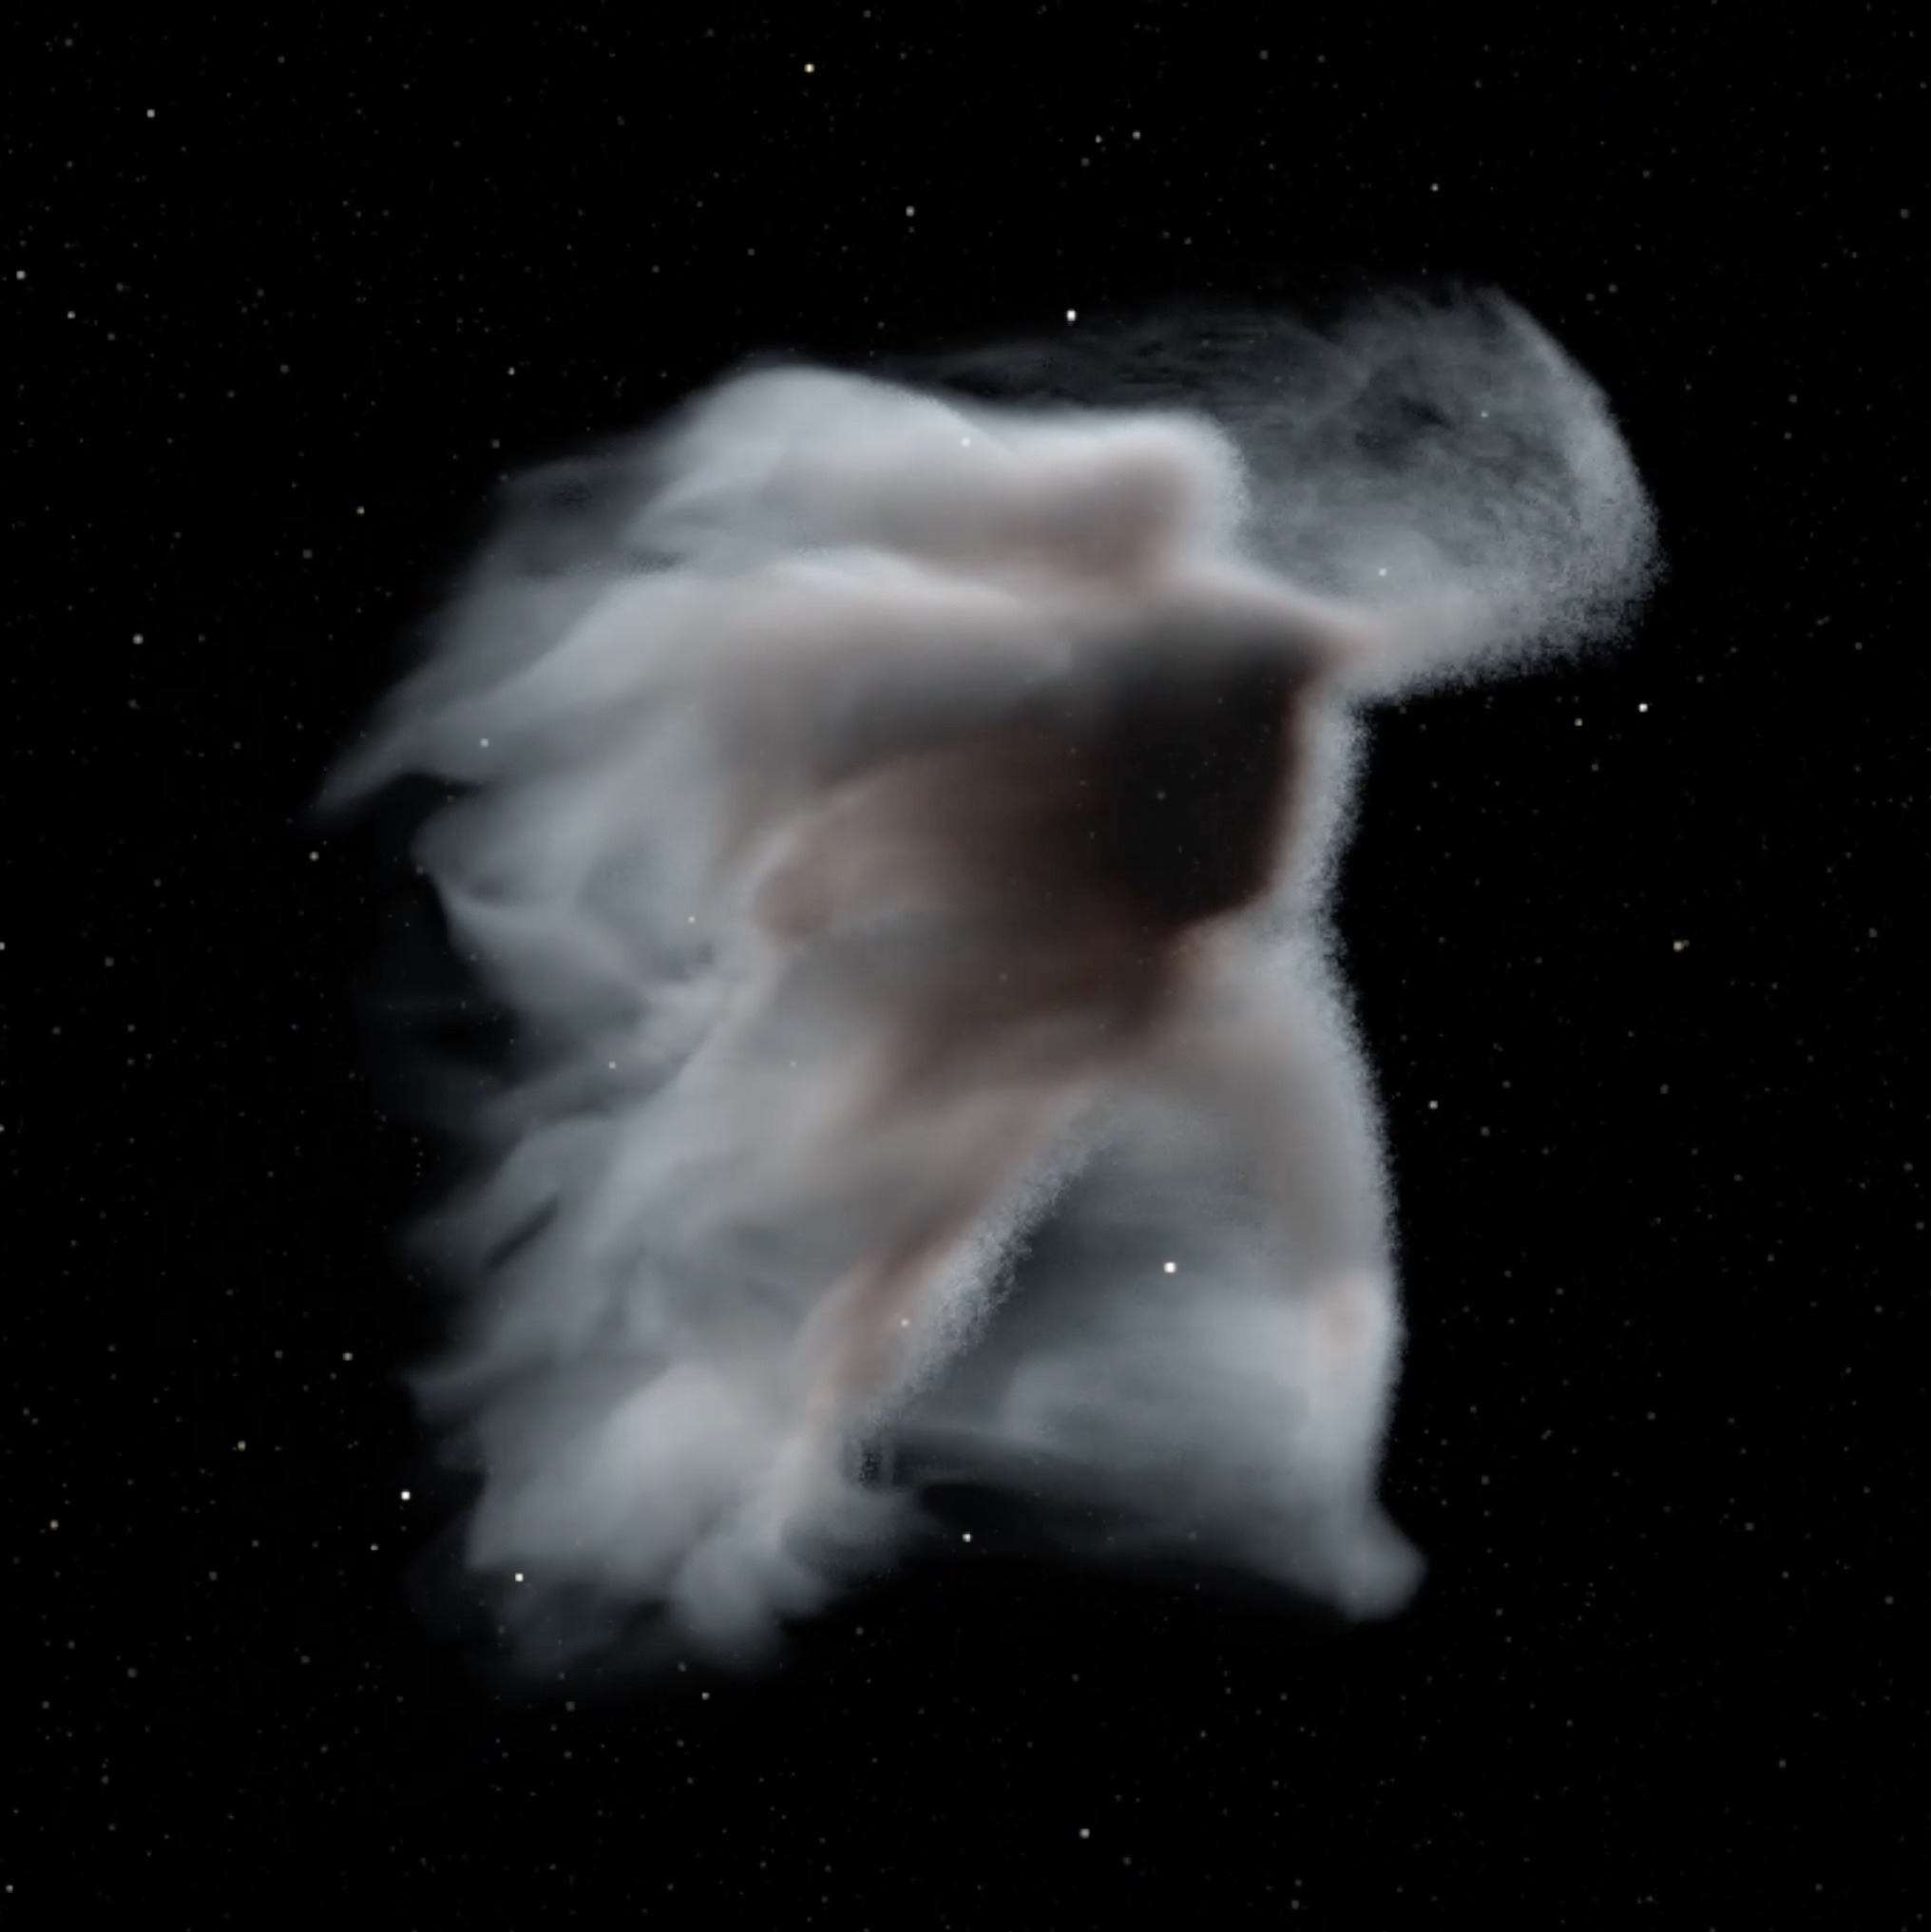 Dancer made of white smoke in a starry sky